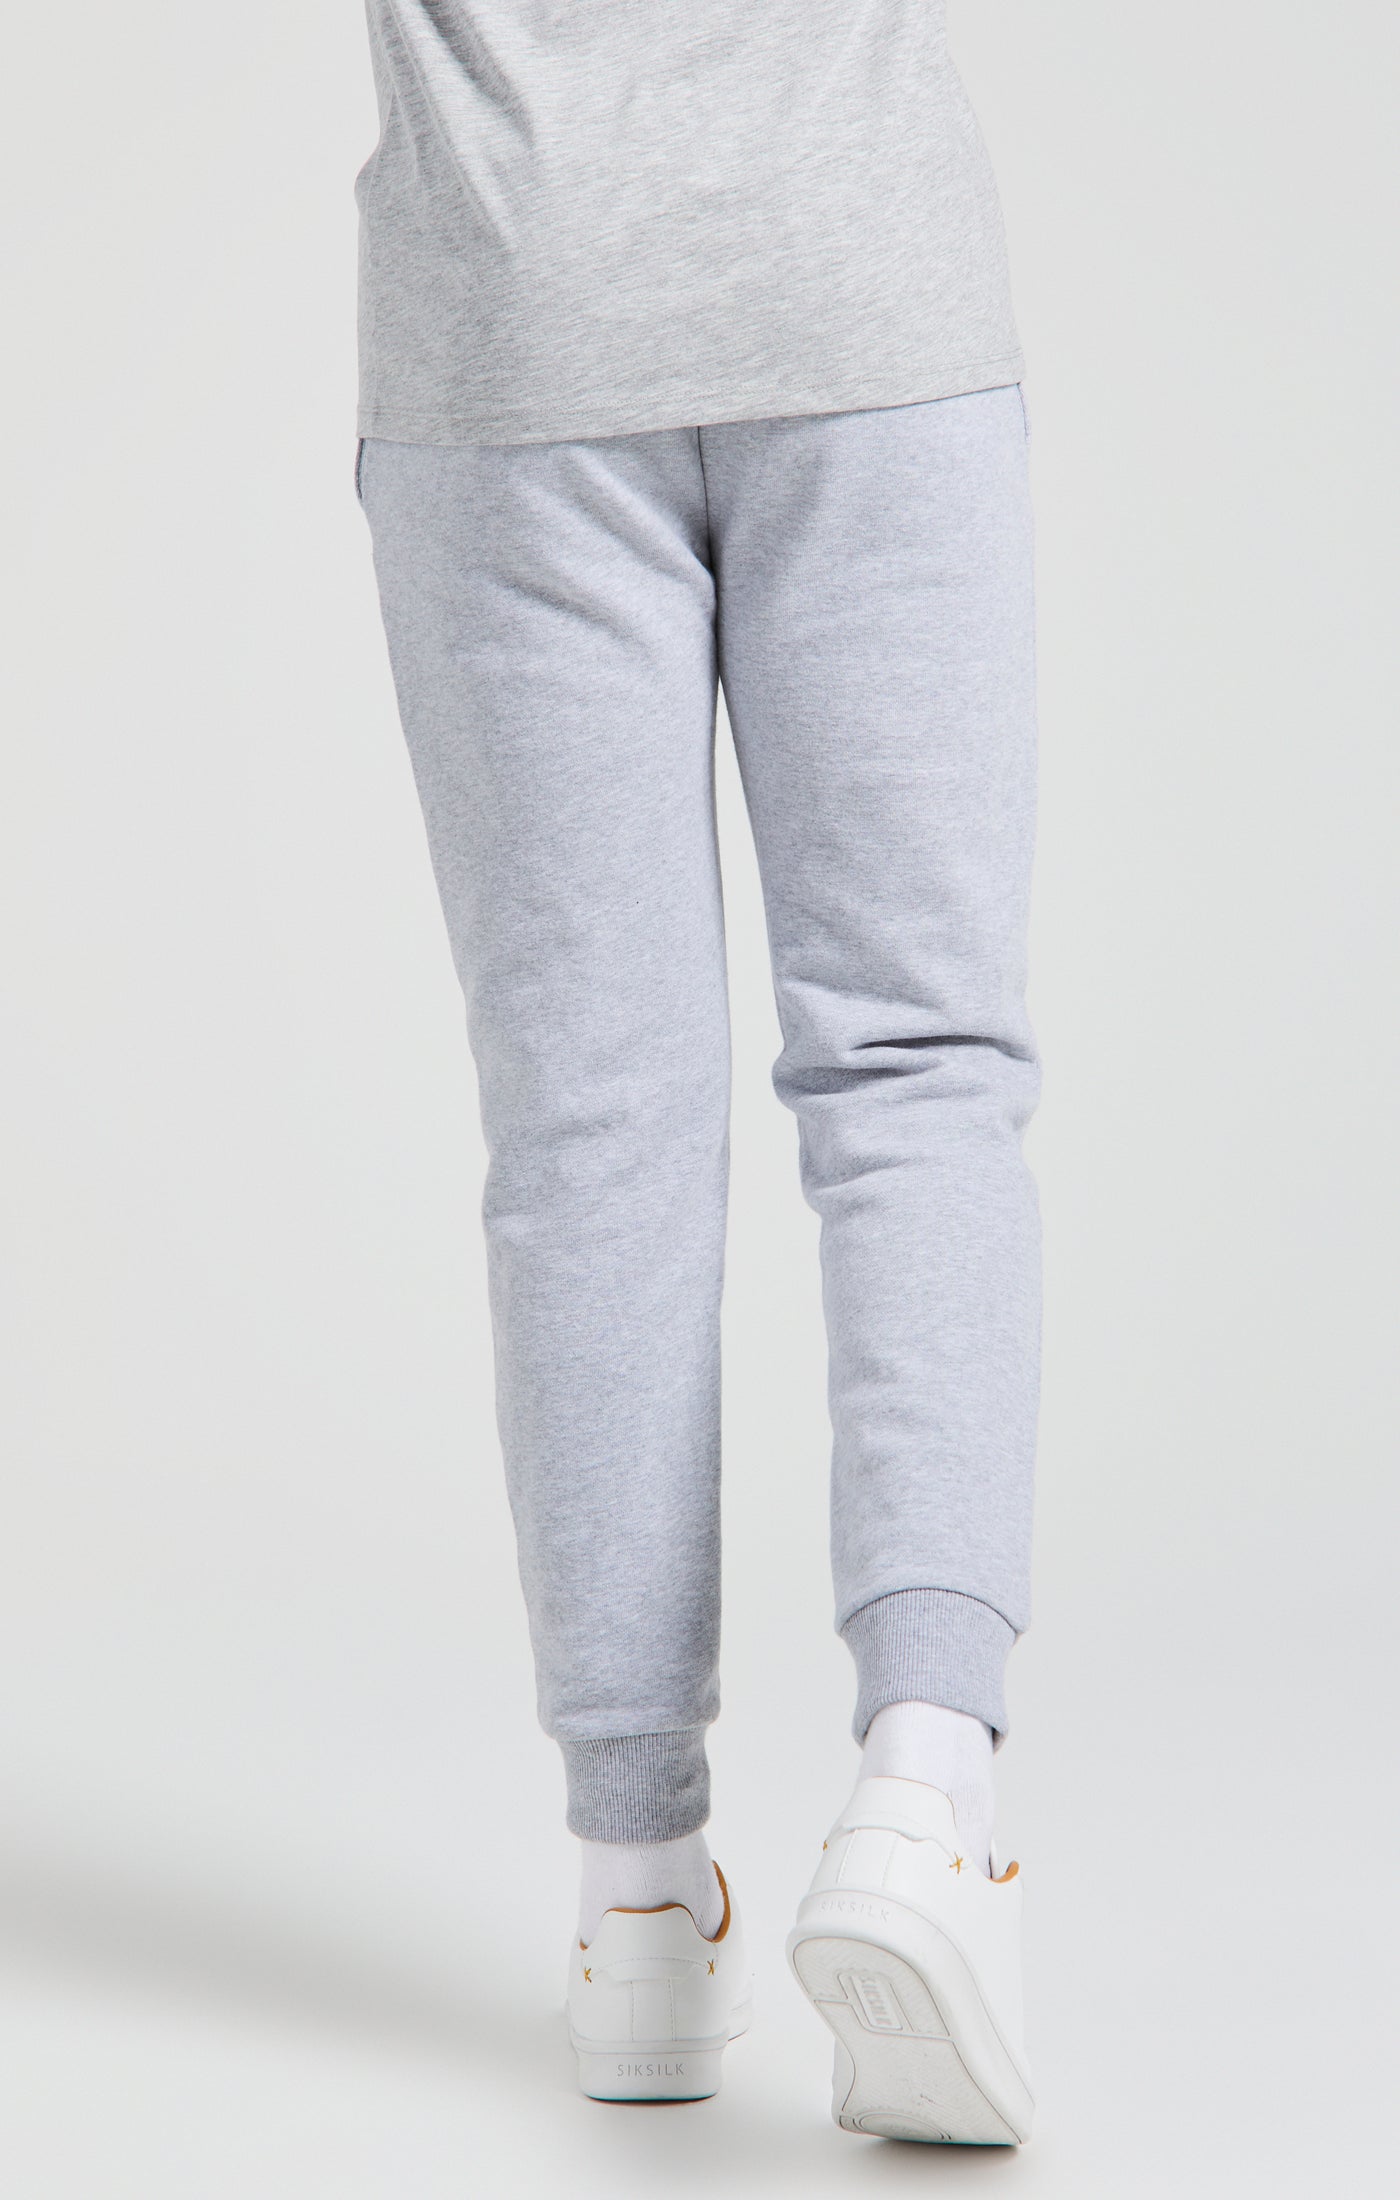 Load image into Gallery viewer, Boys Messi x SikSilk Grey Marl Fleece Pant (3)